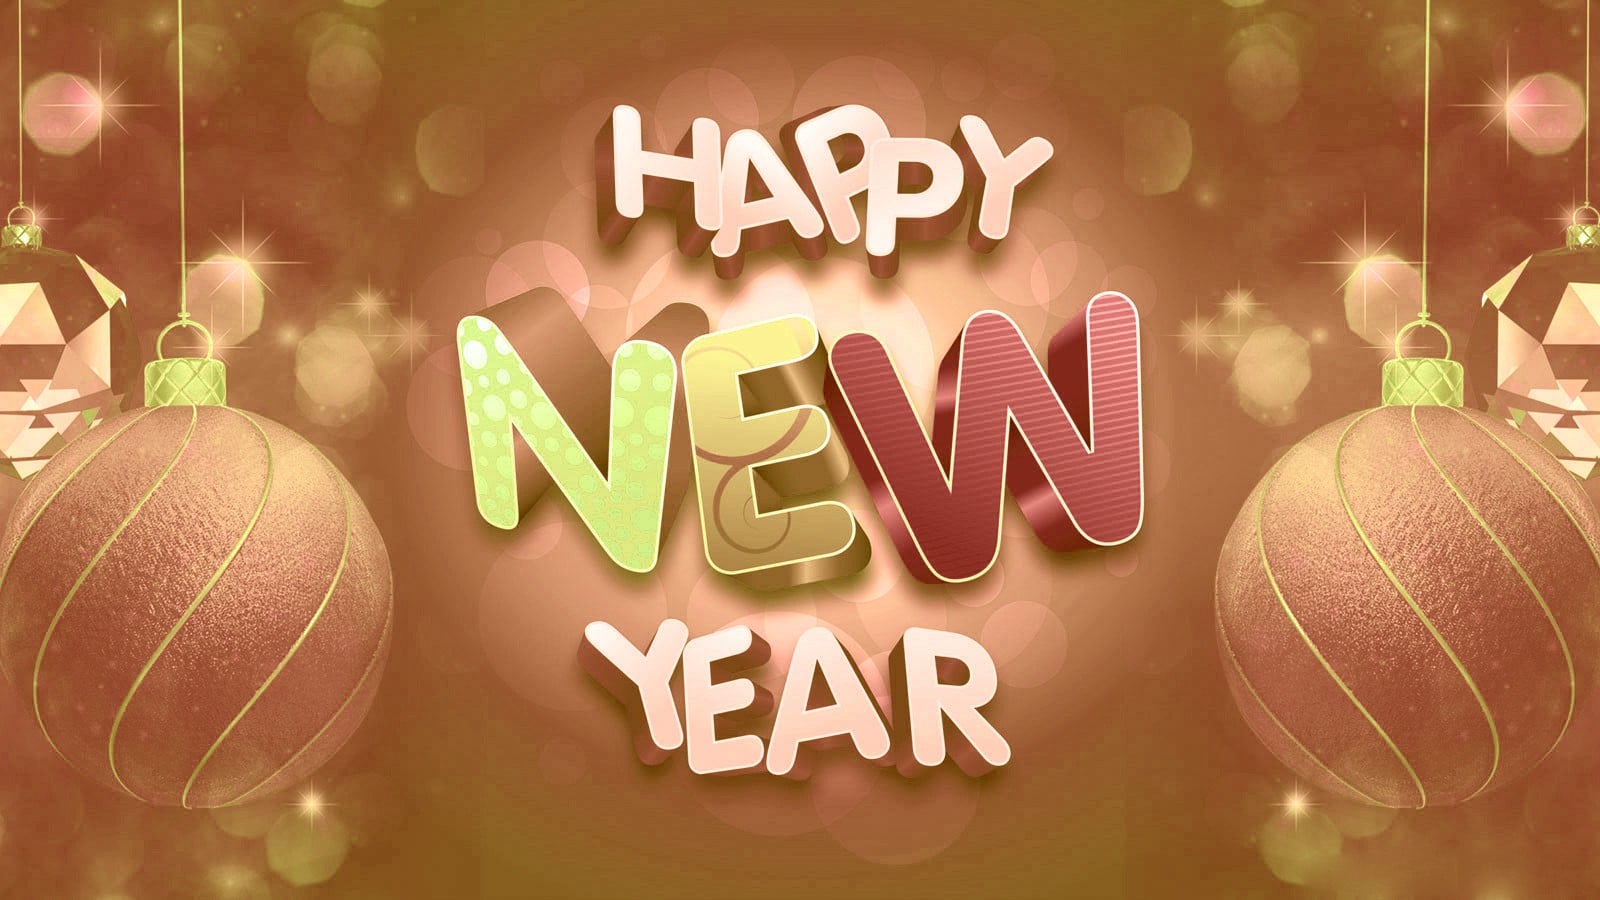 2019 happy new year wallpapers 59376 2424027